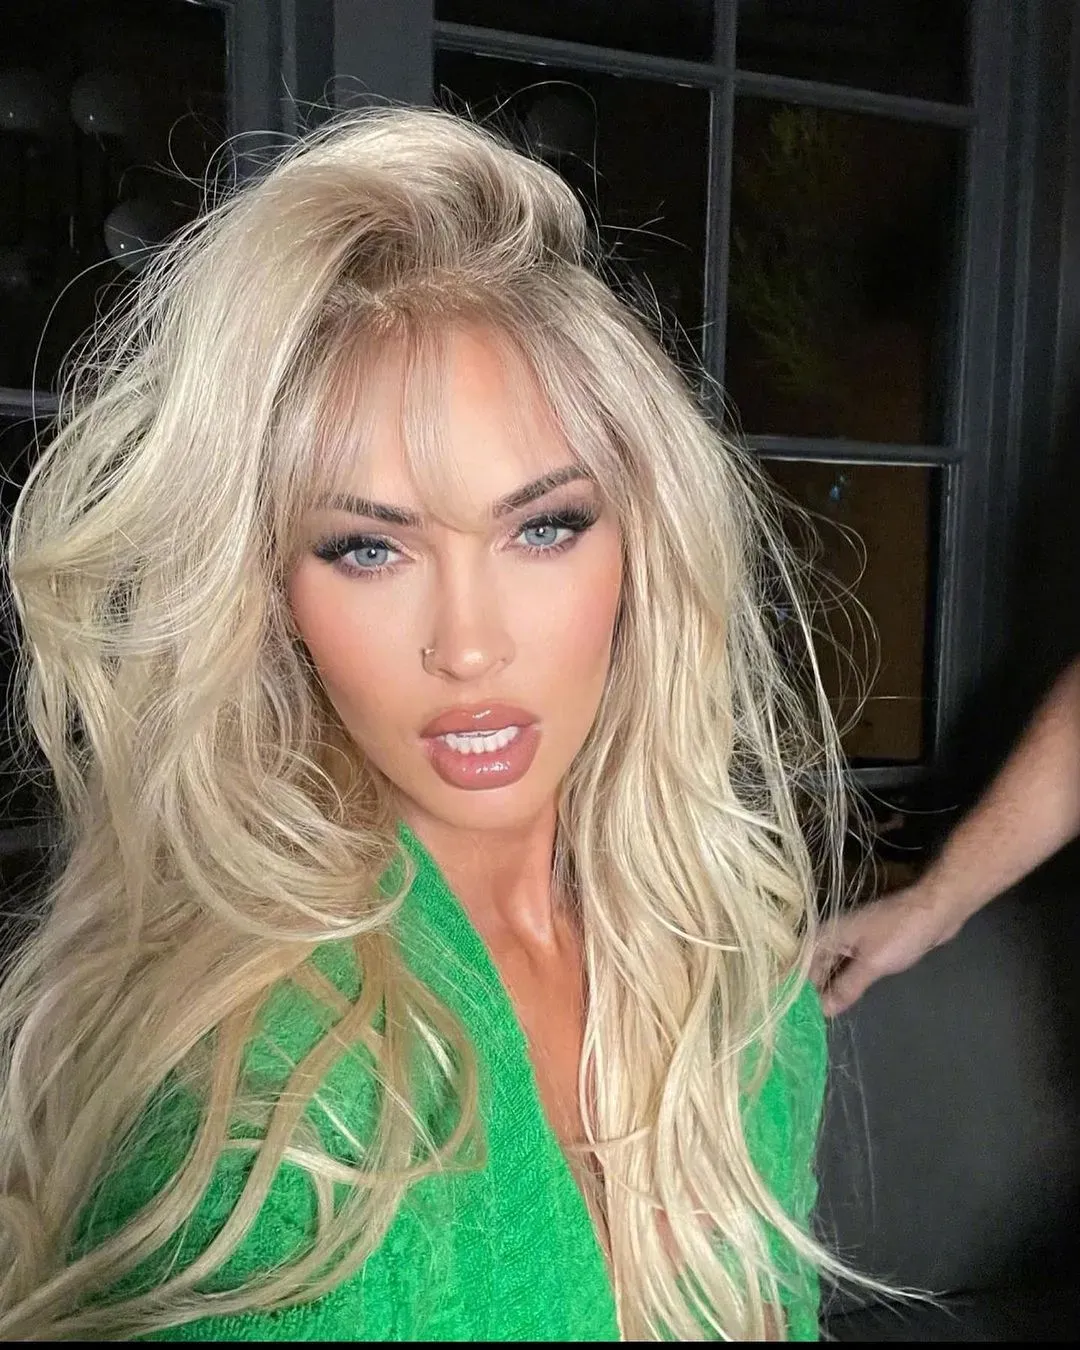 Megan Fox and Machine Gun Kelly dressed as Pamela Anderson and Tommy Lee for Halloween | FMV6